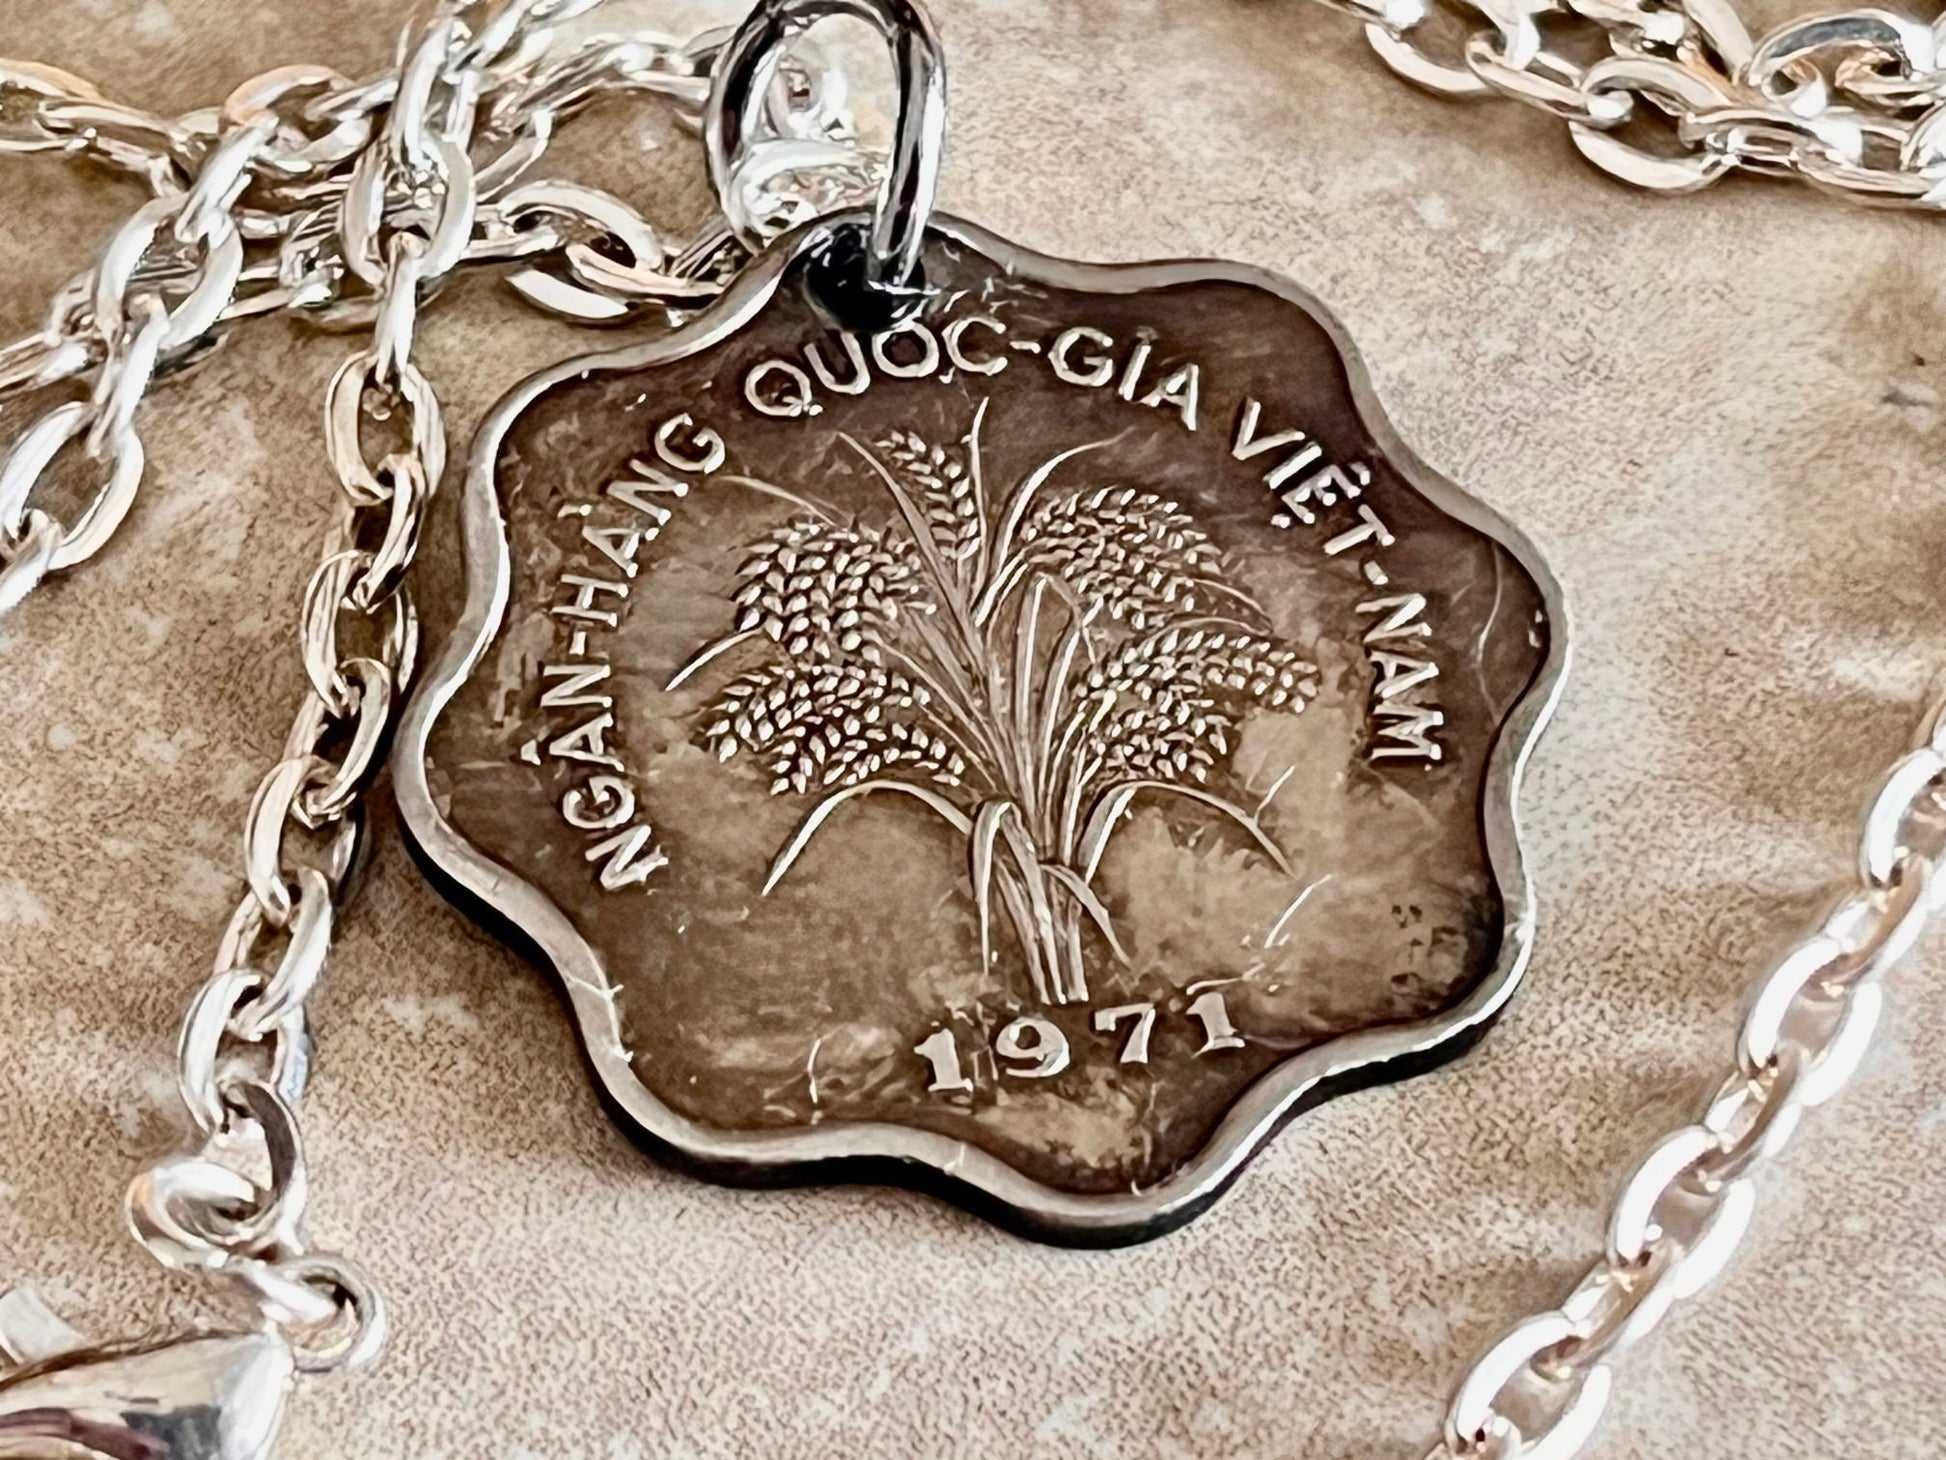 Viet Nam Coin Necklace 5 Dong Coin Hoa Pendant Personal Old Vintage Handmade Jewelry Gift Friend Charm For Him Her World Coin Collector